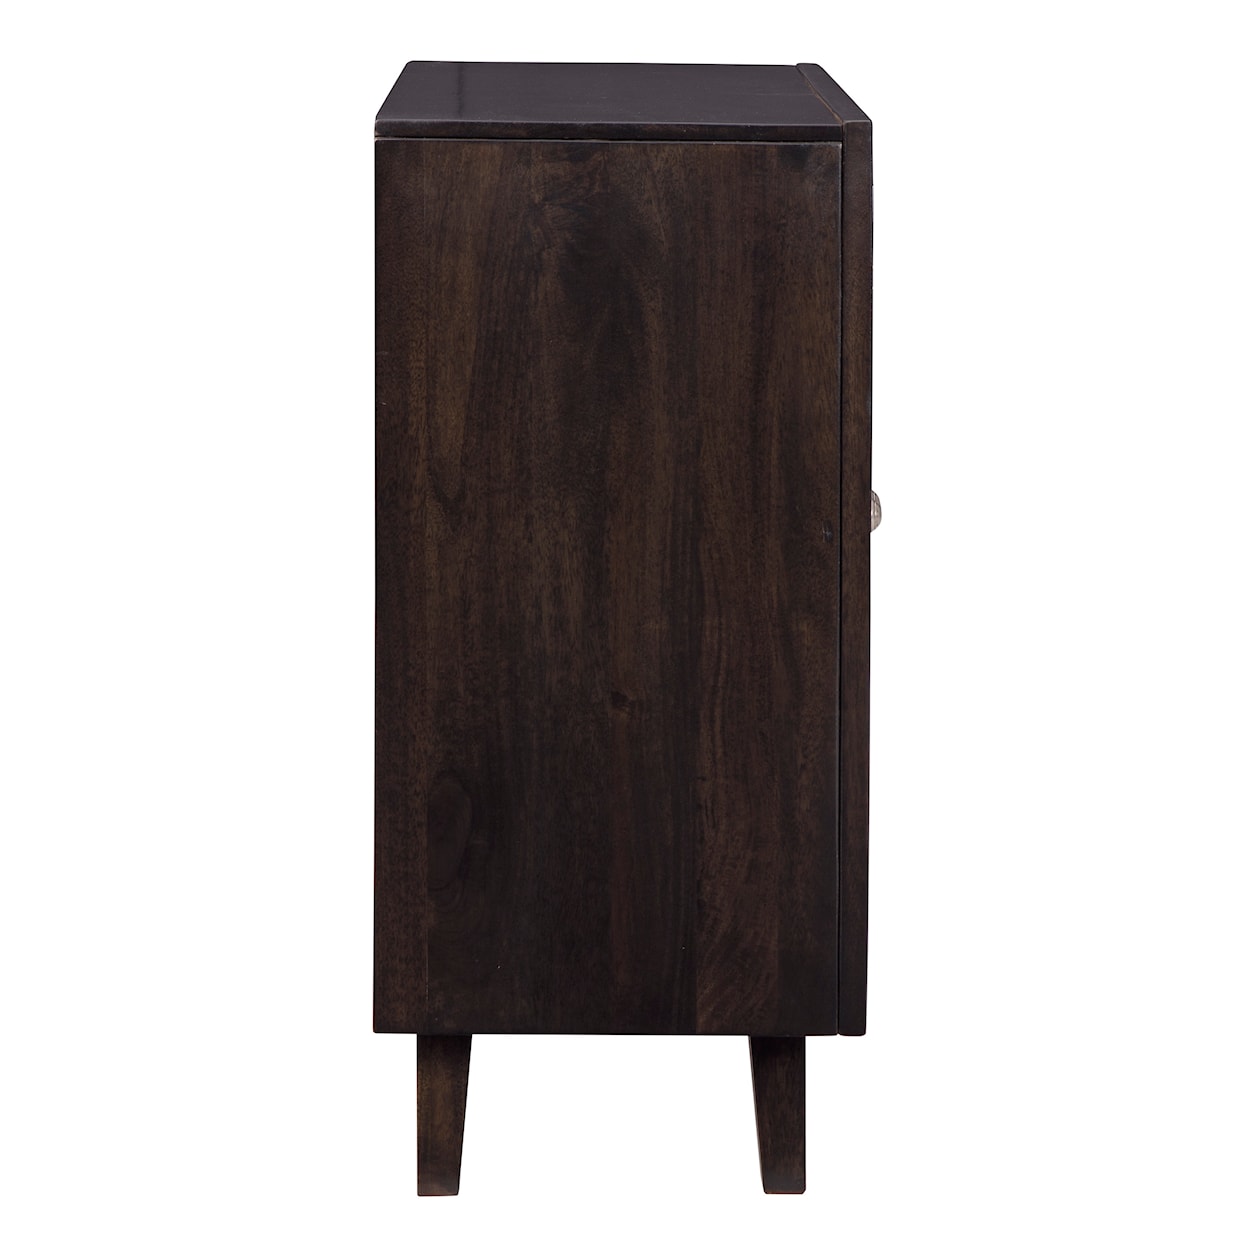 Signature Design by Ashley Furniture Ronlen Accent Cabinet